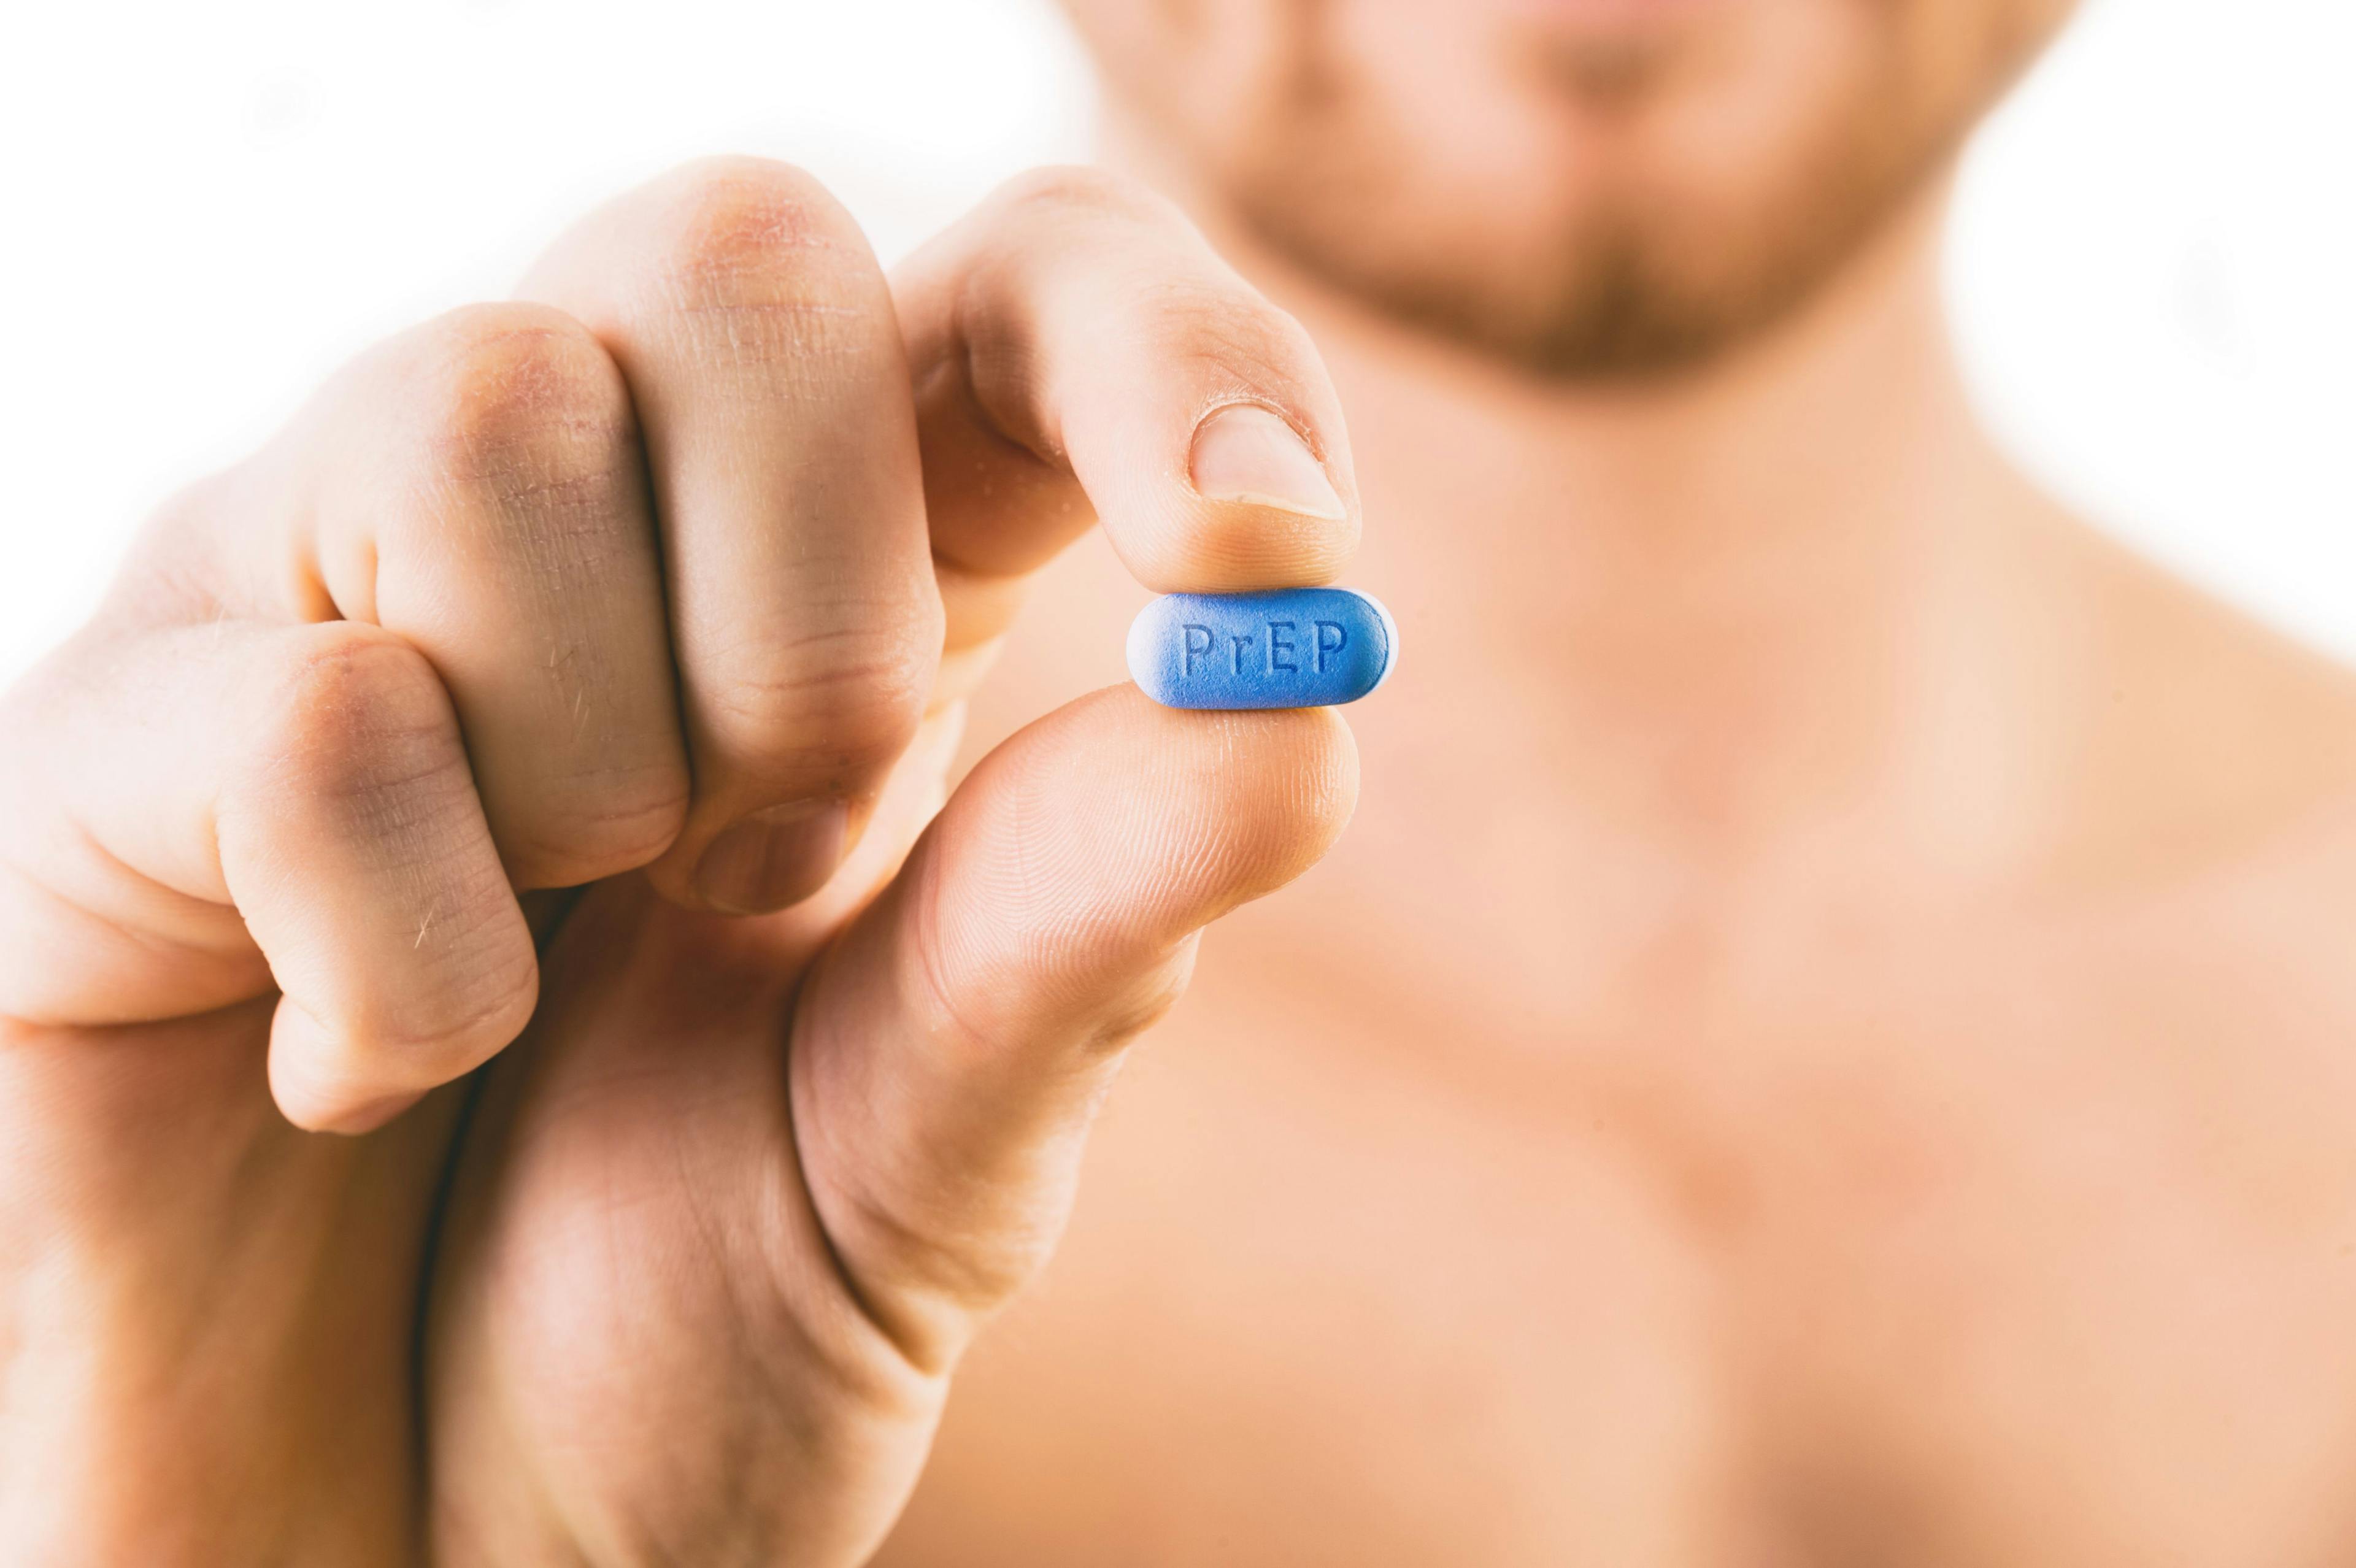 Man holding a pill used for Pre-Exposure Prophylaxis (PrEP) to p - Image credit: Mbruxelle | stock.adobe.com